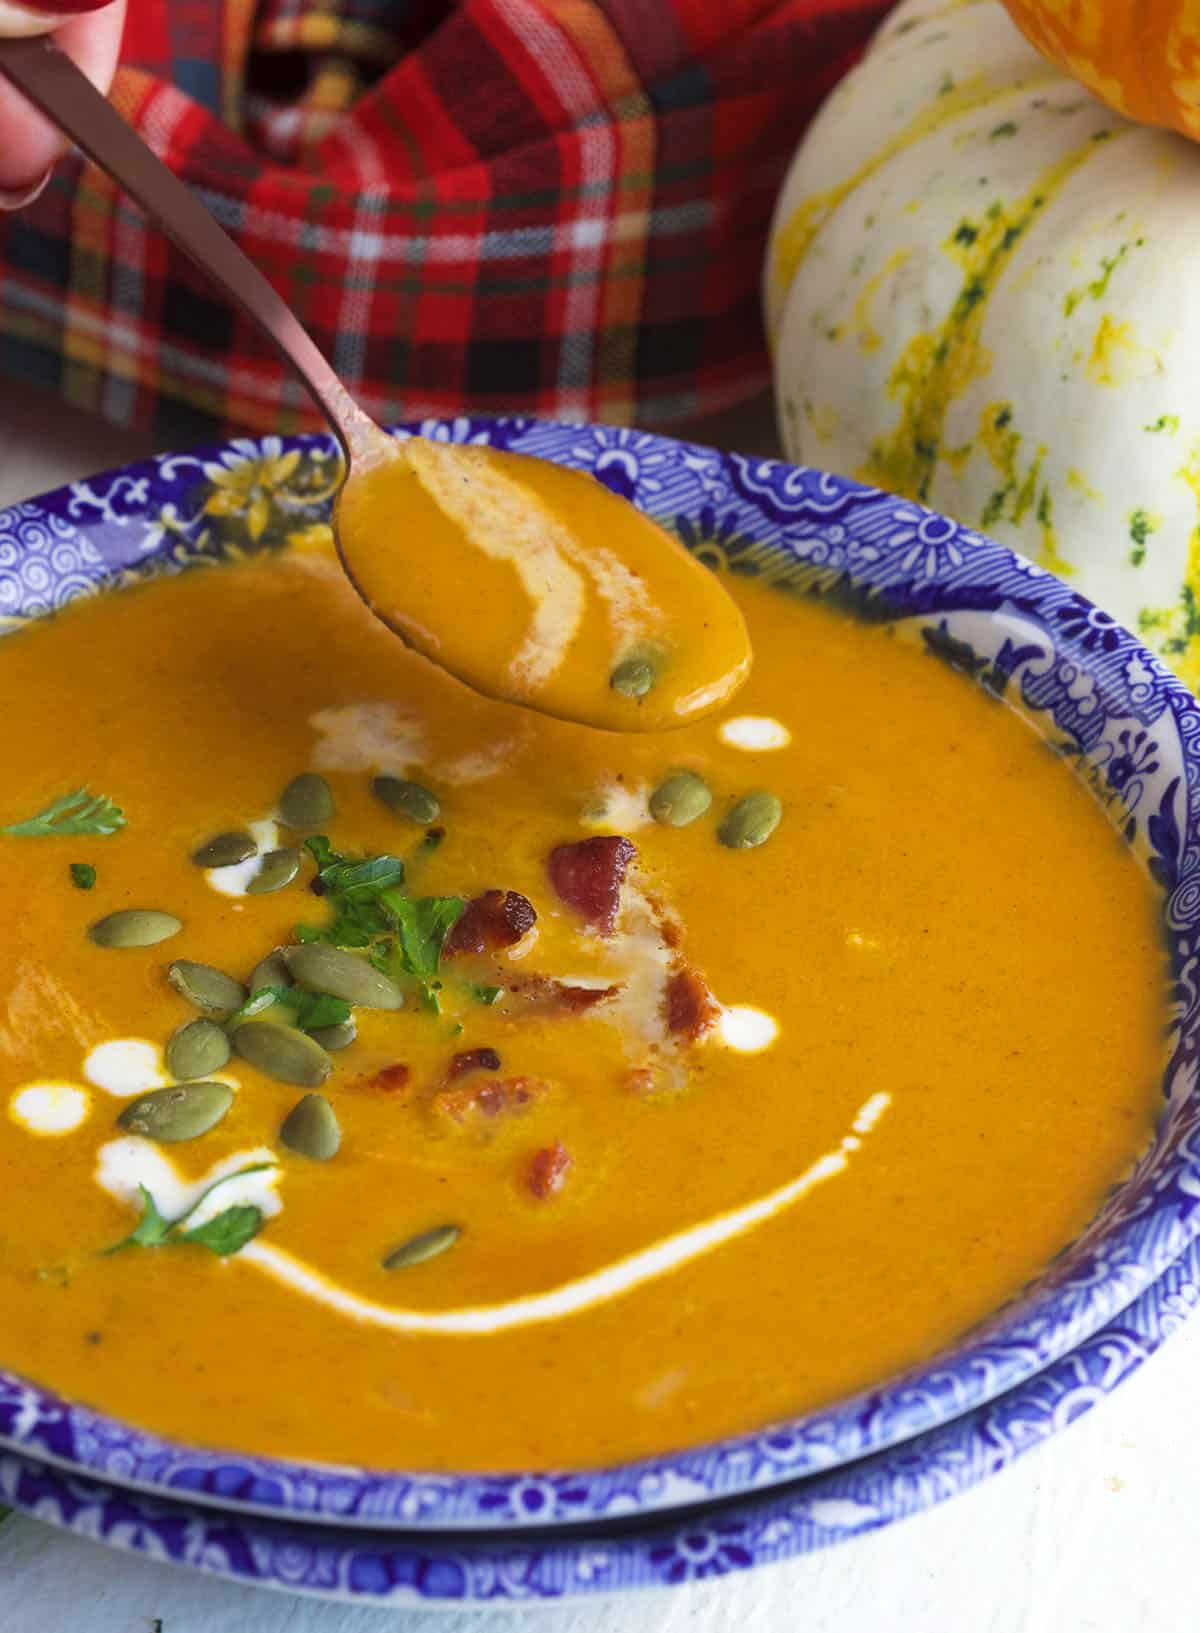 A spoon is held above a bowl full of pumpkin soup.